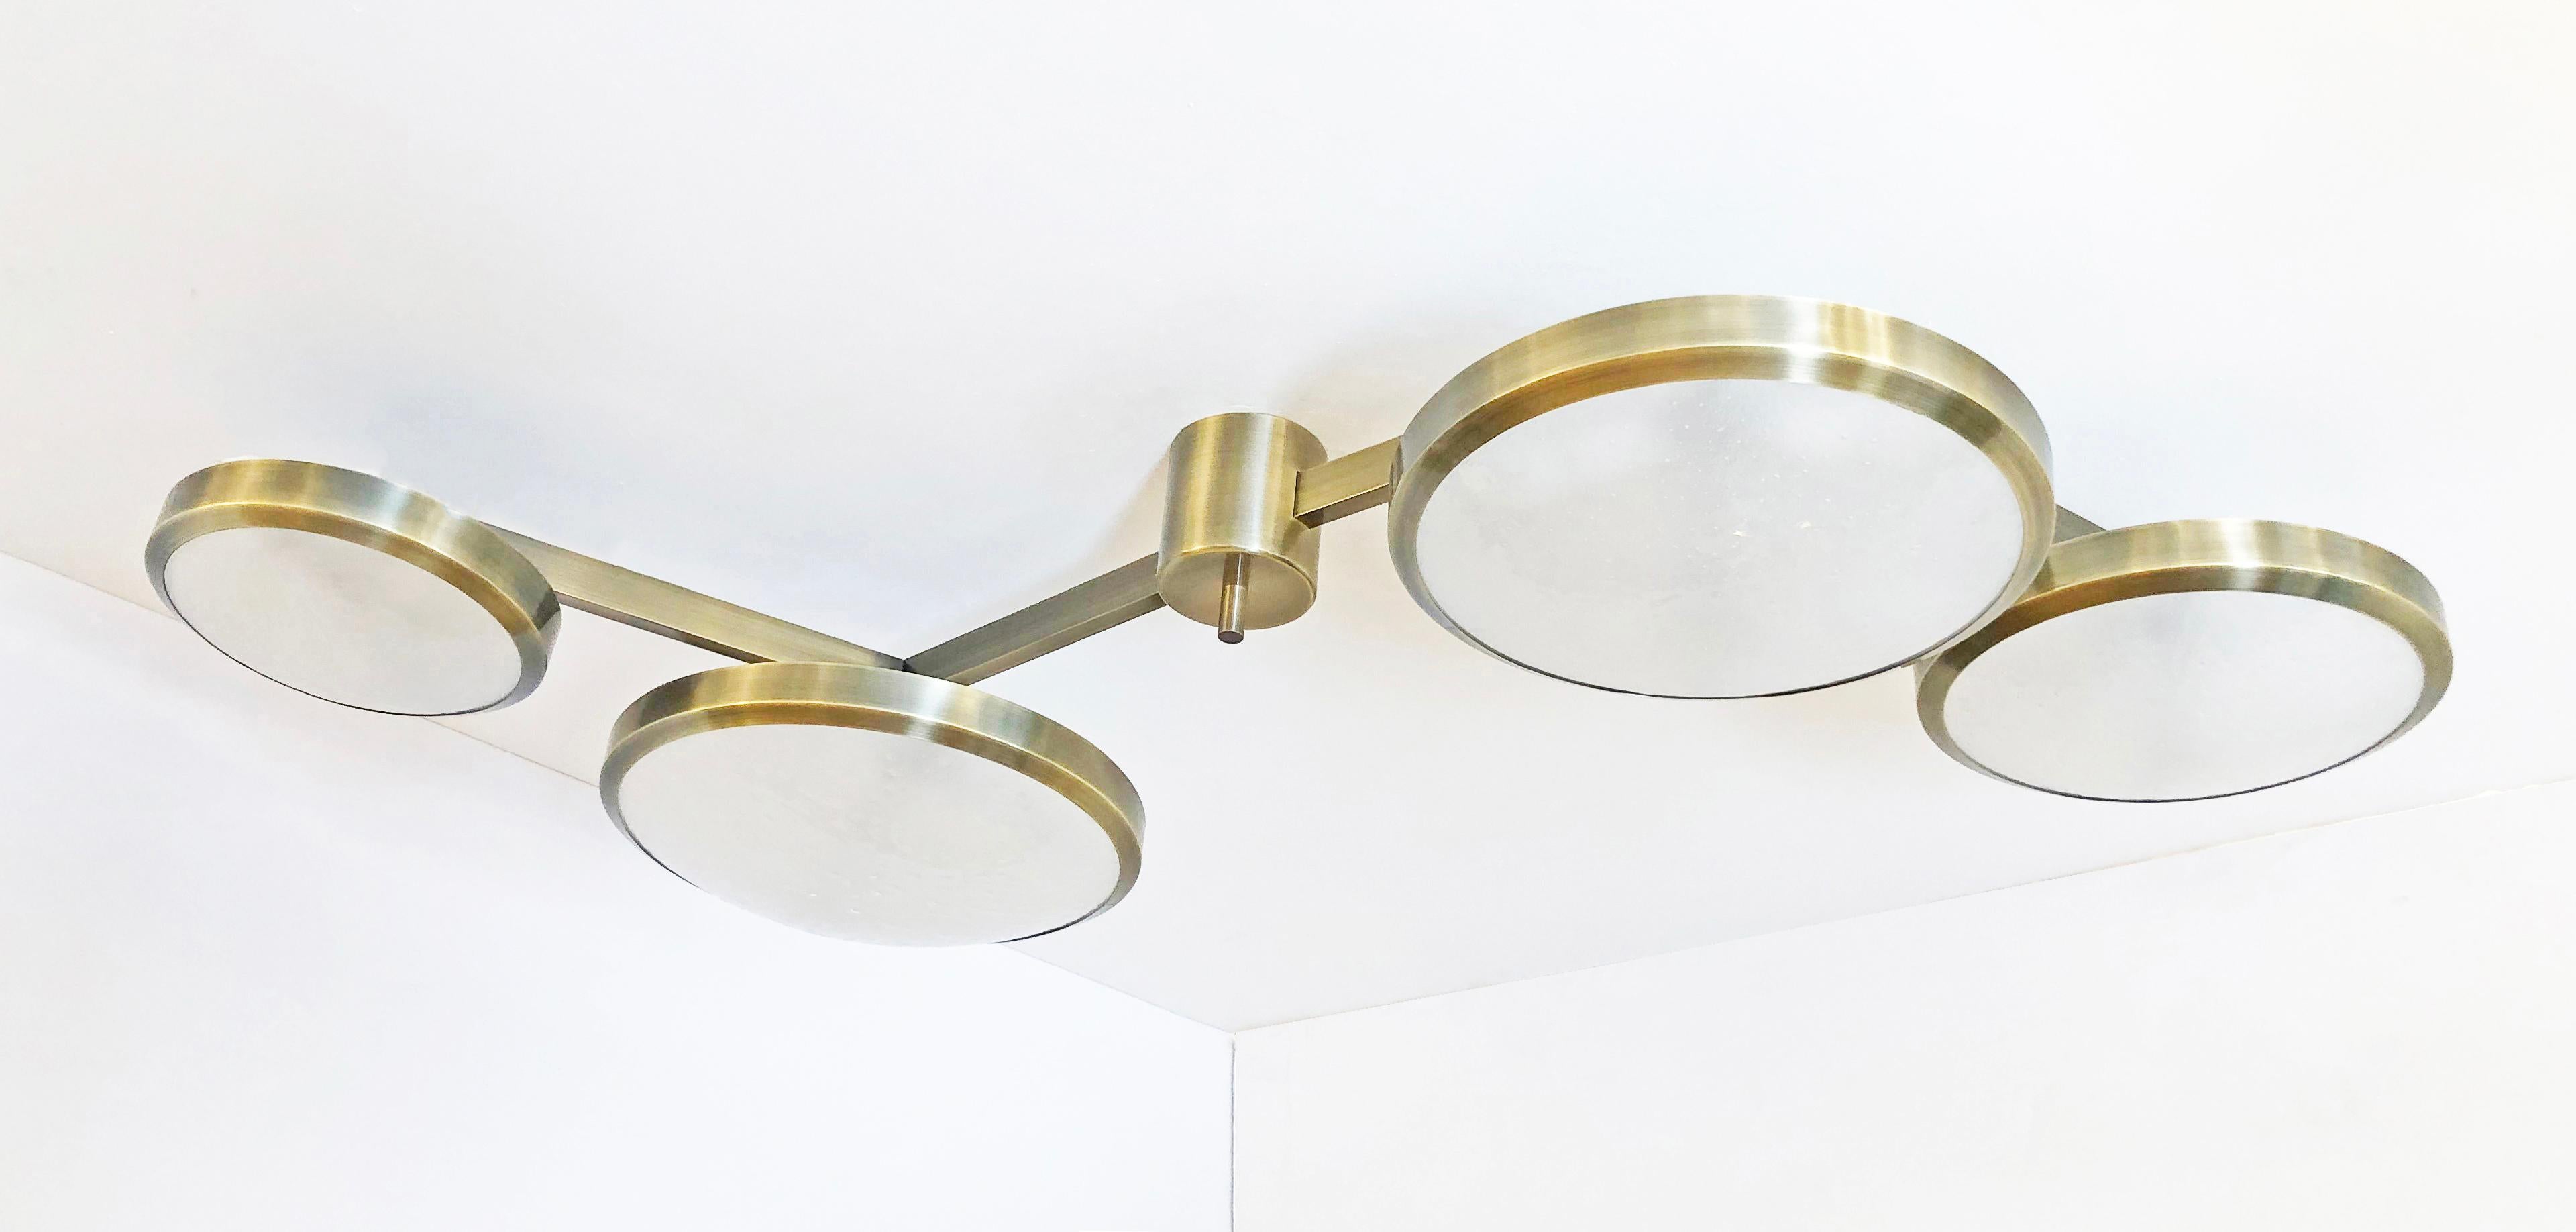 Quattro Ceiling Light by Gaspare Asaro-Polished Brass Finish For Sale 1